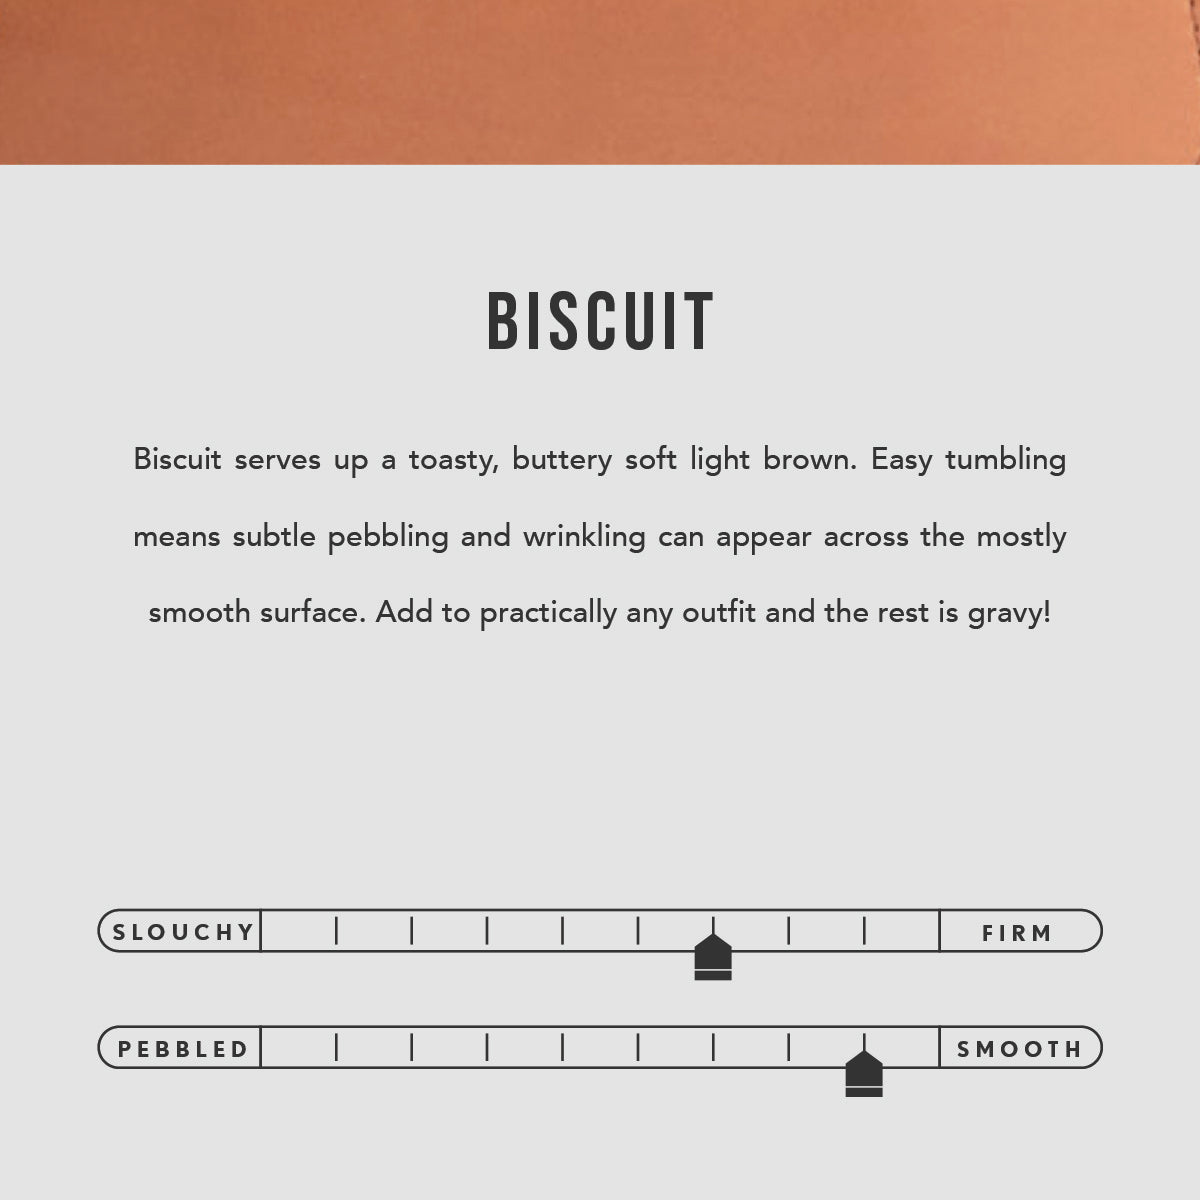 Biscuit | infographic